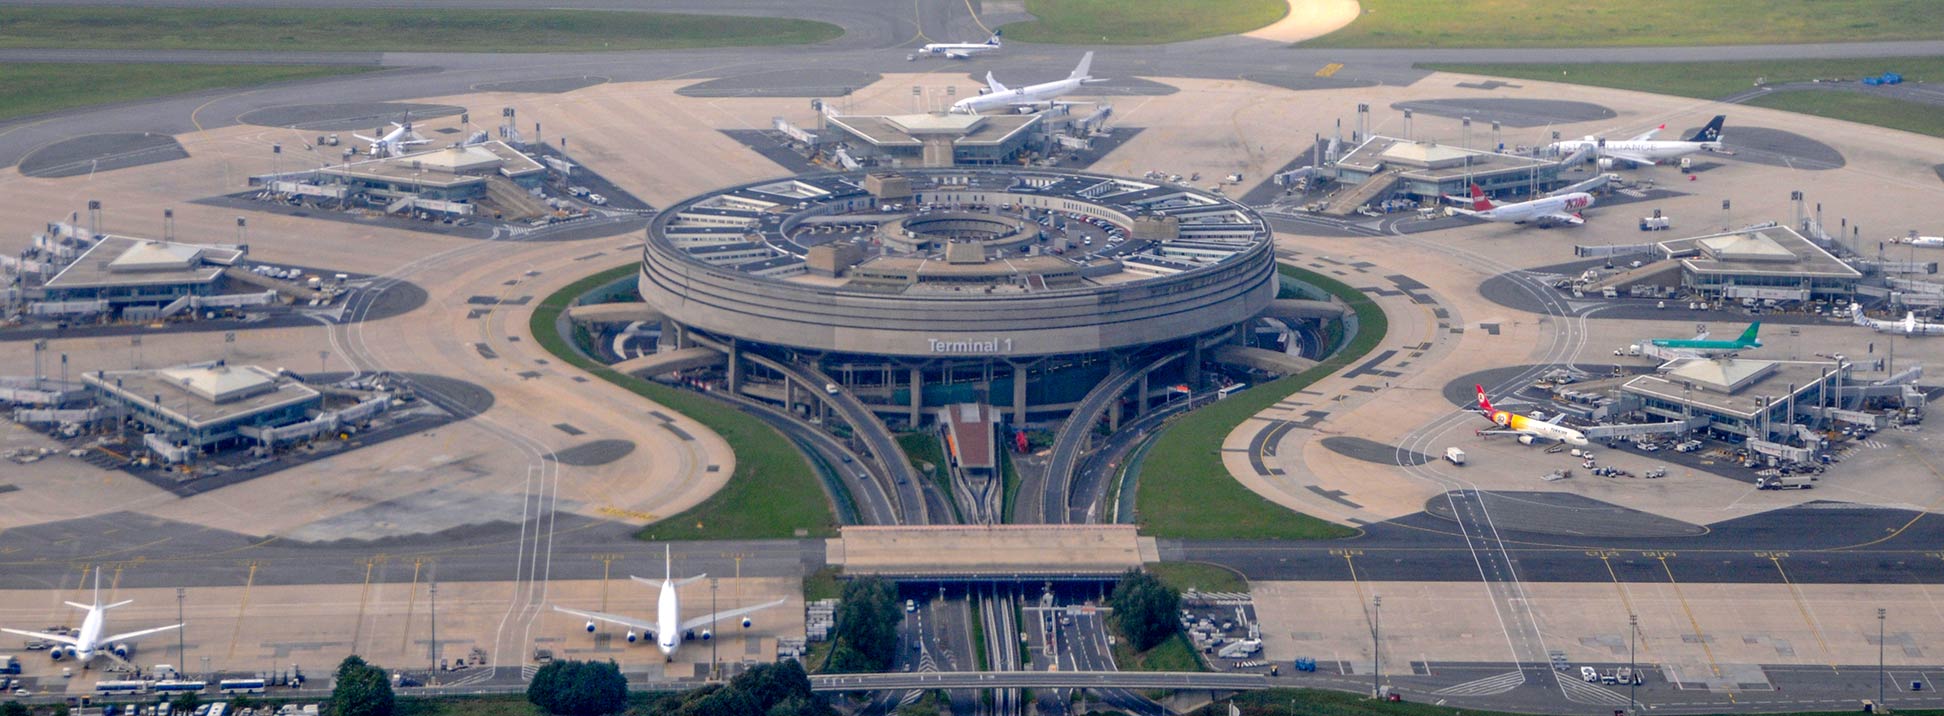 The 10 Biggest Airports In The World Worldatlas - vrogue.co